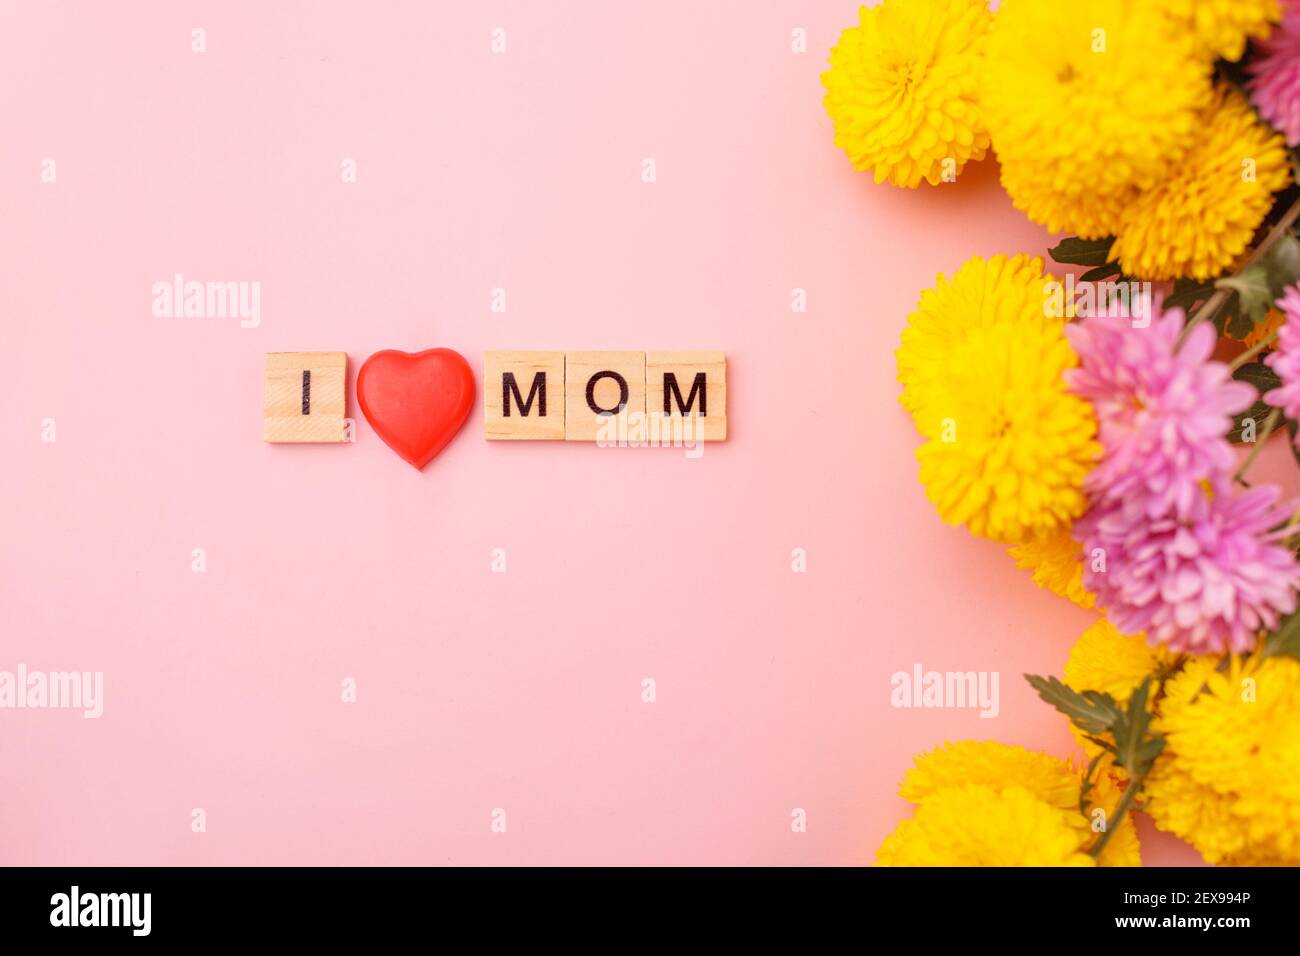 Wooden letters in the phrase I love mom with flowers on a pink background. Greeting card concept for mother day. Stock Photo